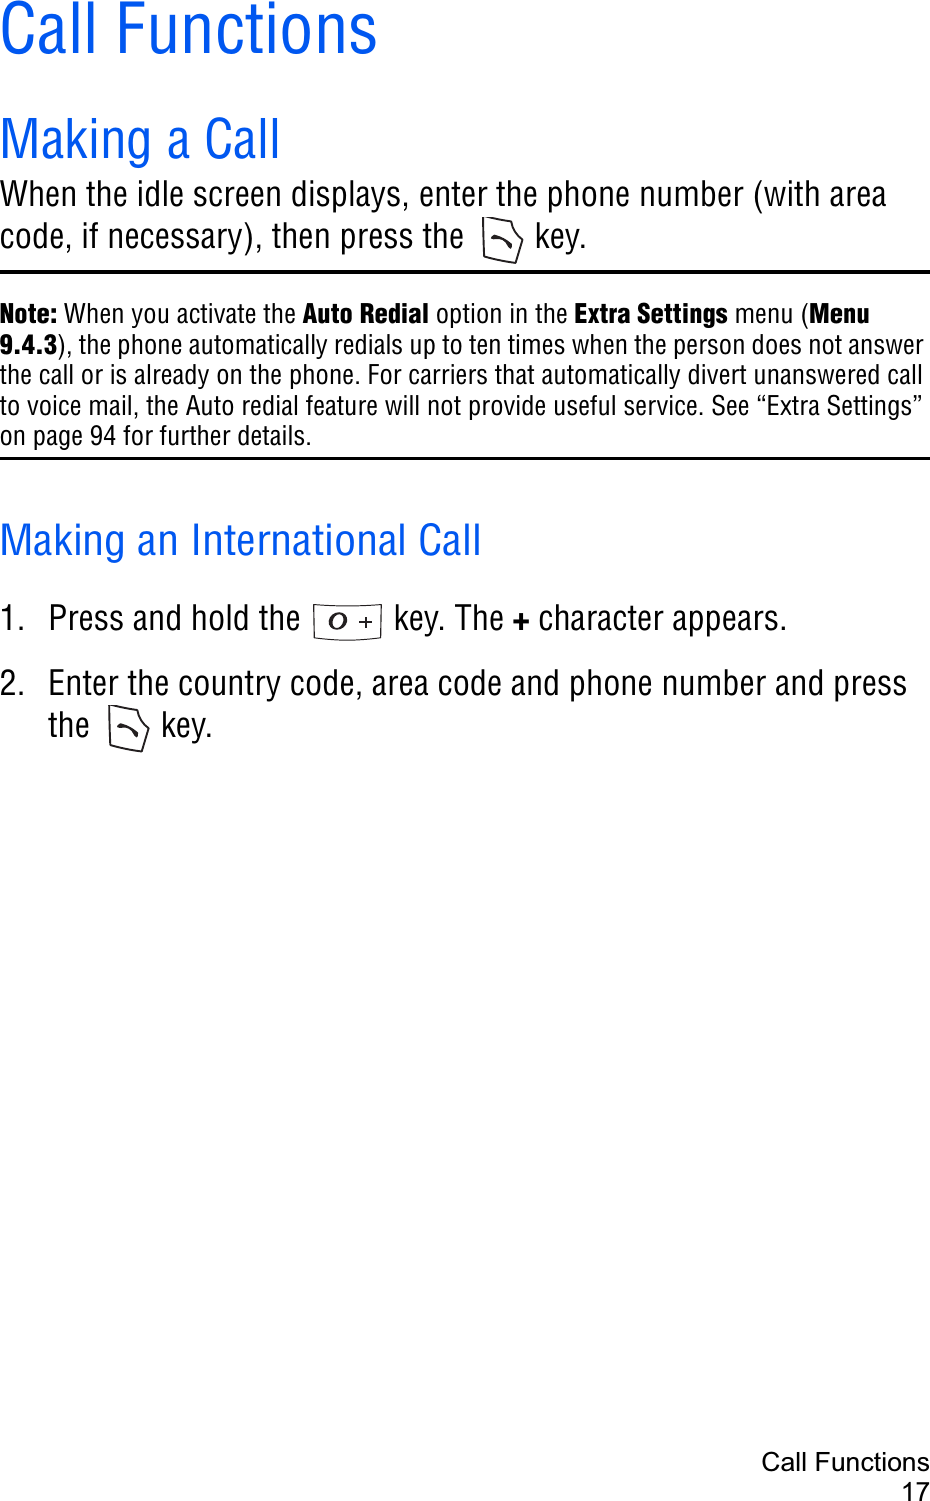 Call Functions17Call FunctionsMaking a CallWhen the idle screen displays, enter the phone number (with area code, if necessary), then press the  key.Note: When you activate the Auto Redial option in the Extra Settings menu (Menu 9.4.3), the phone automatically redials up to ten times when the person does not answer the call or is already on the phone. For carriers that automatically divert unanswered call to voice mail, the Auto redial feature will not provide useful service. See “Extra Settings” on page 94 for further details.Making an International Call1. Press and hold the   key. The + character appears.2. Enter the country code, area code and phone number and press the  key.